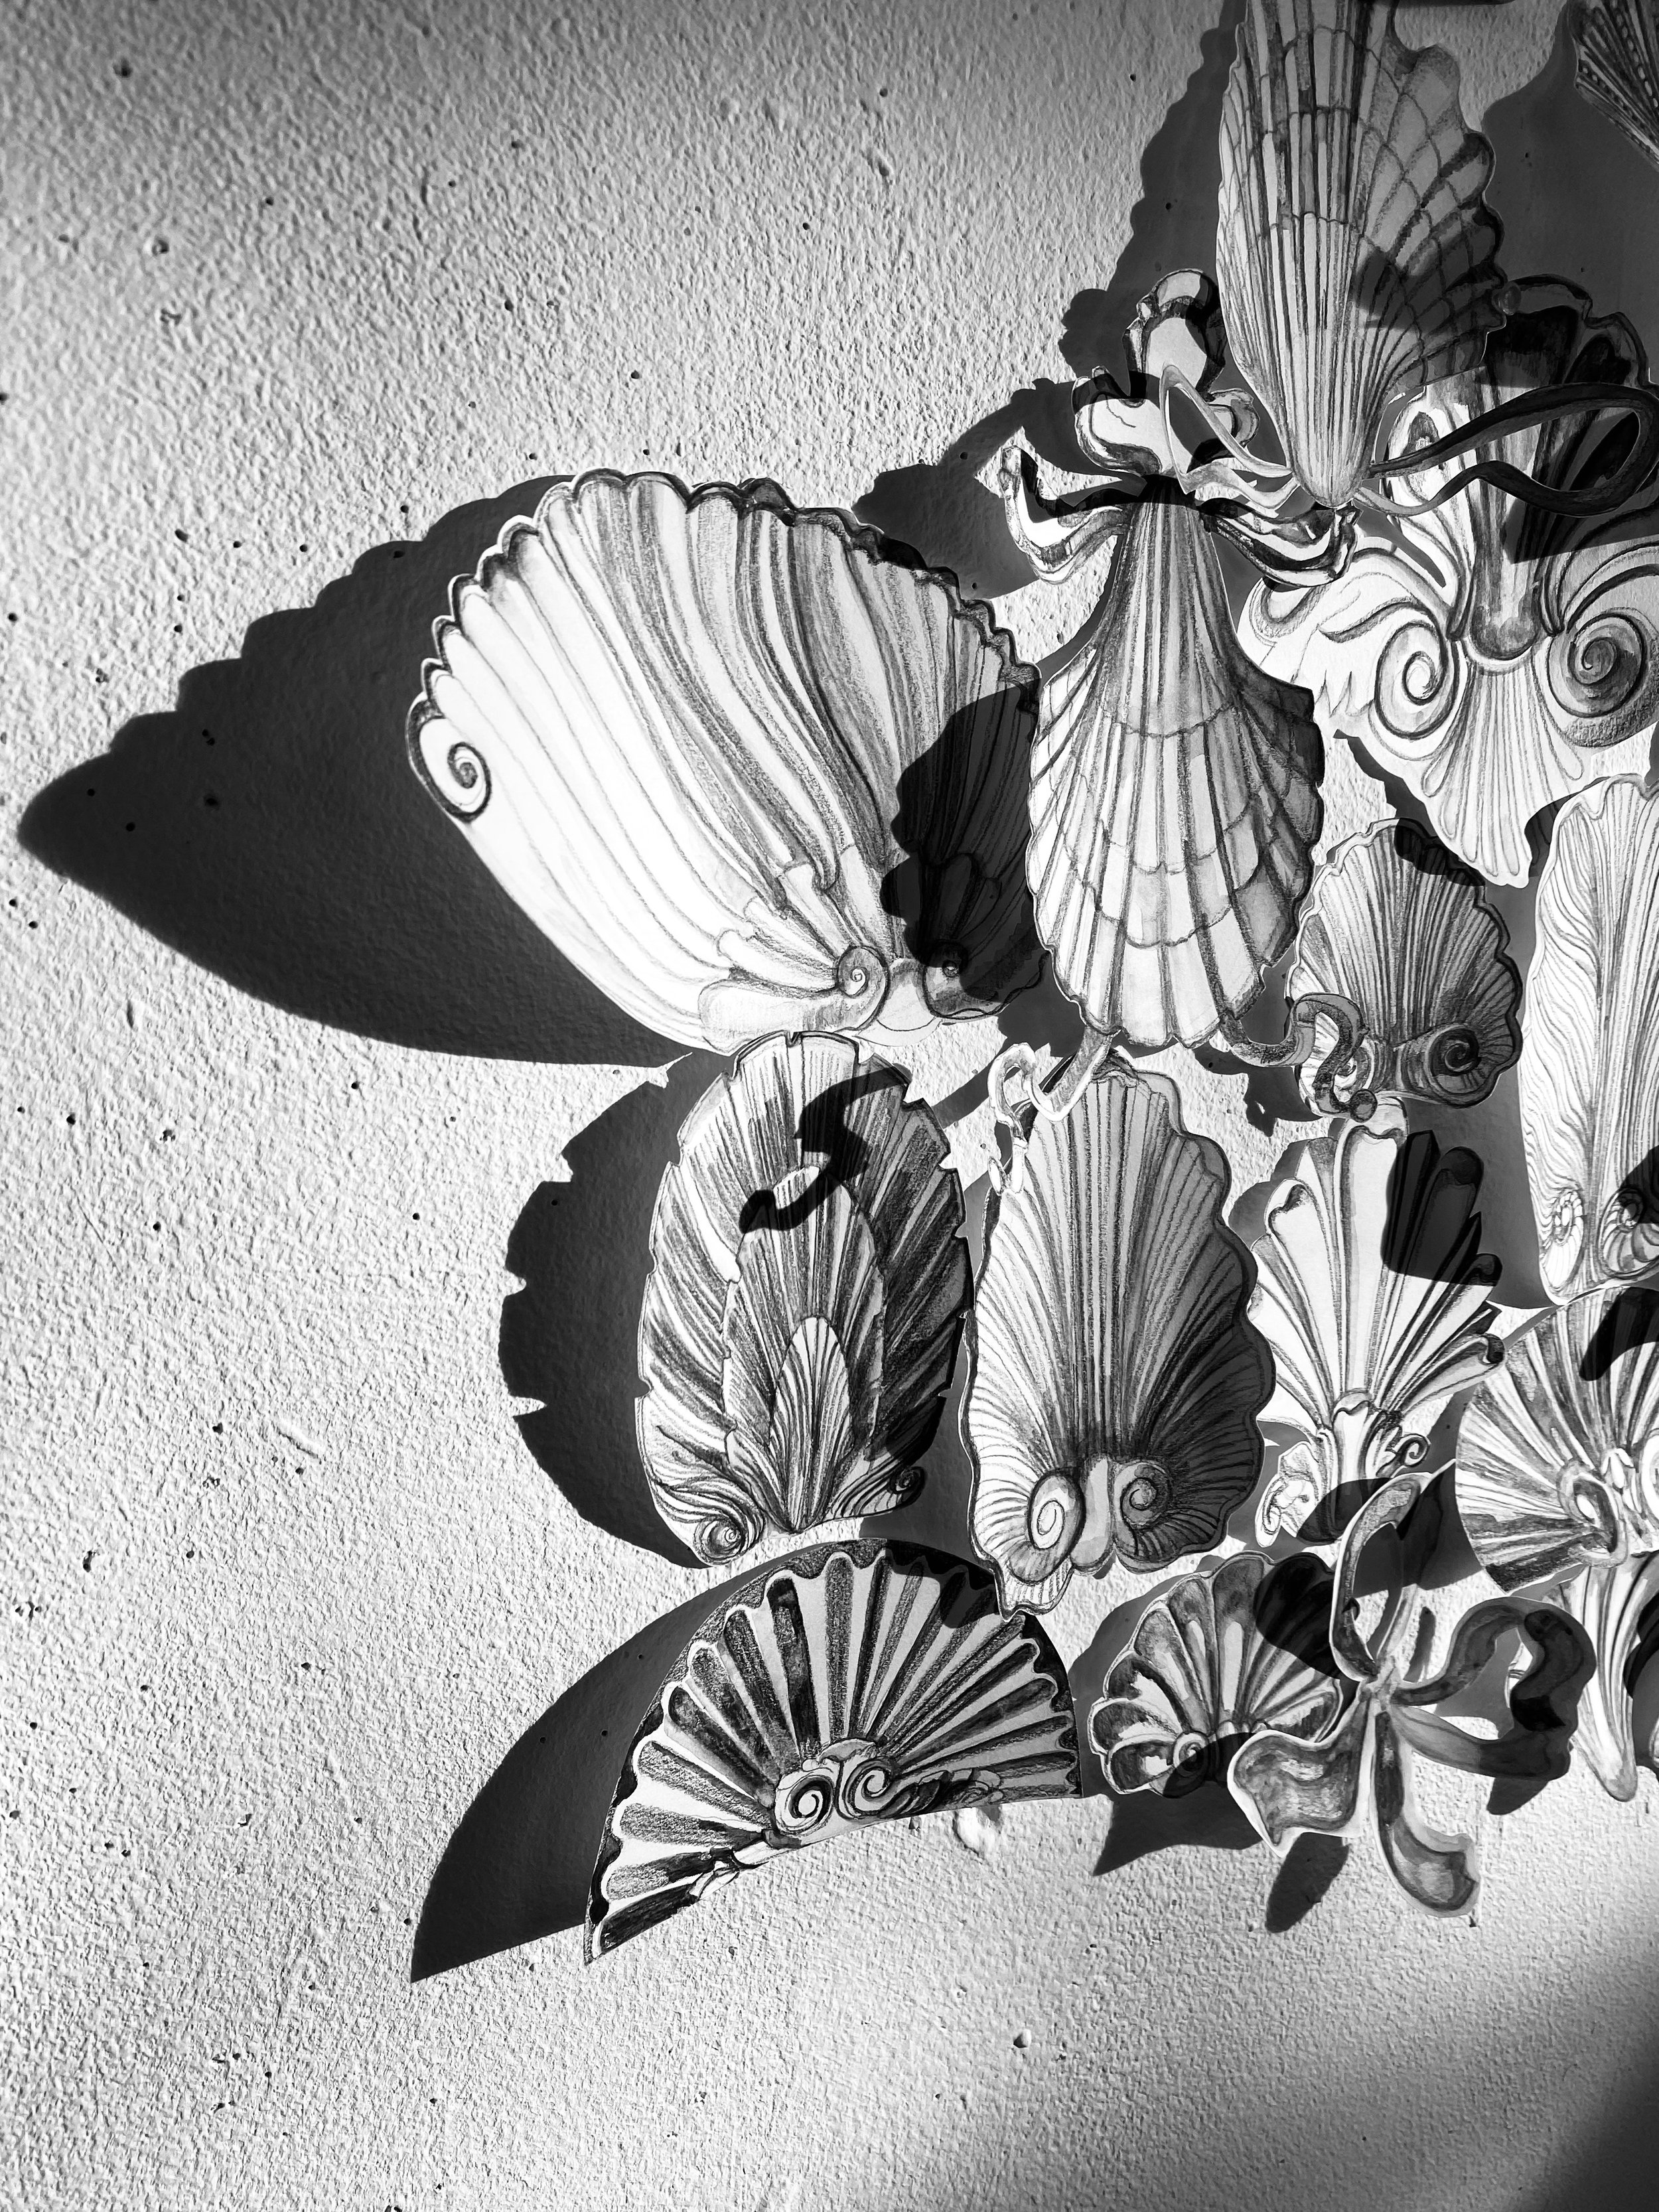 Detail of shell drawings in black and white with shadows